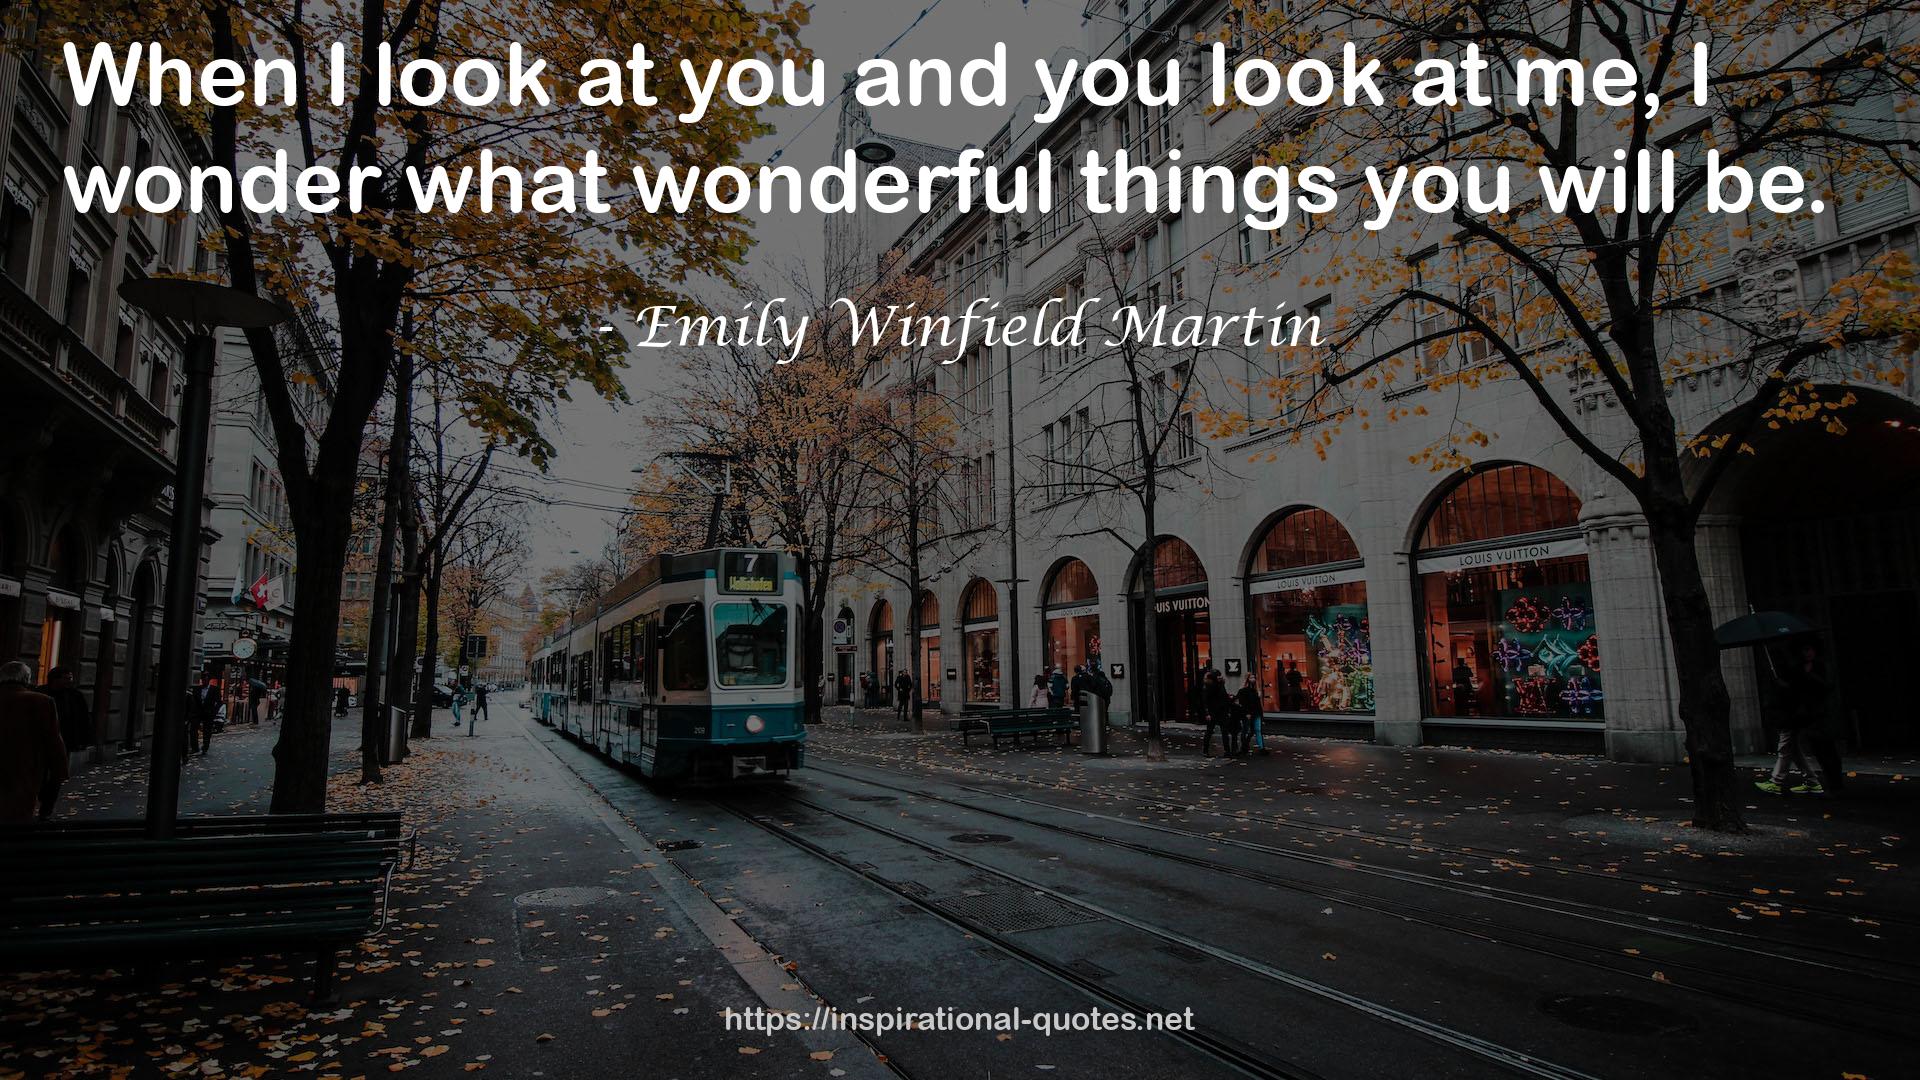 Emily Winfield Martin QUOTES